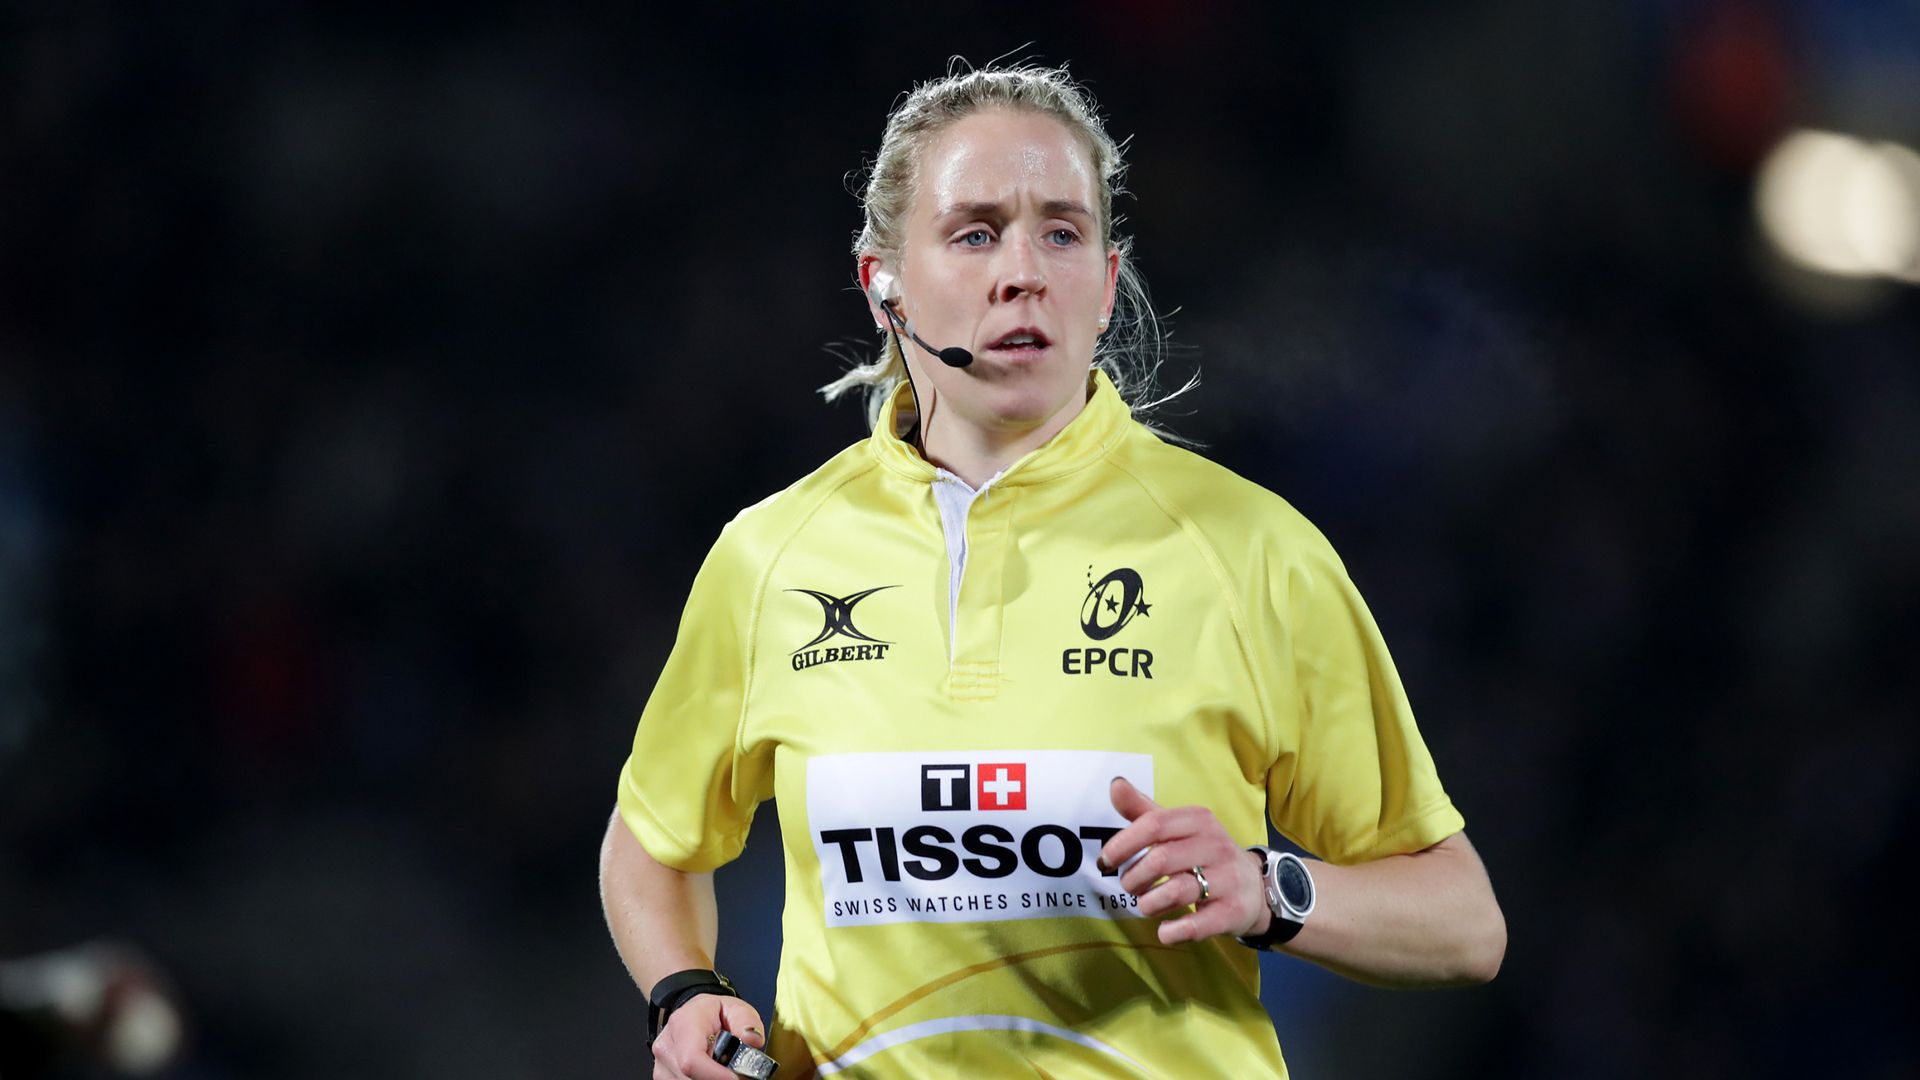 Neville to become first female to officiate at men's Rugby World Cup